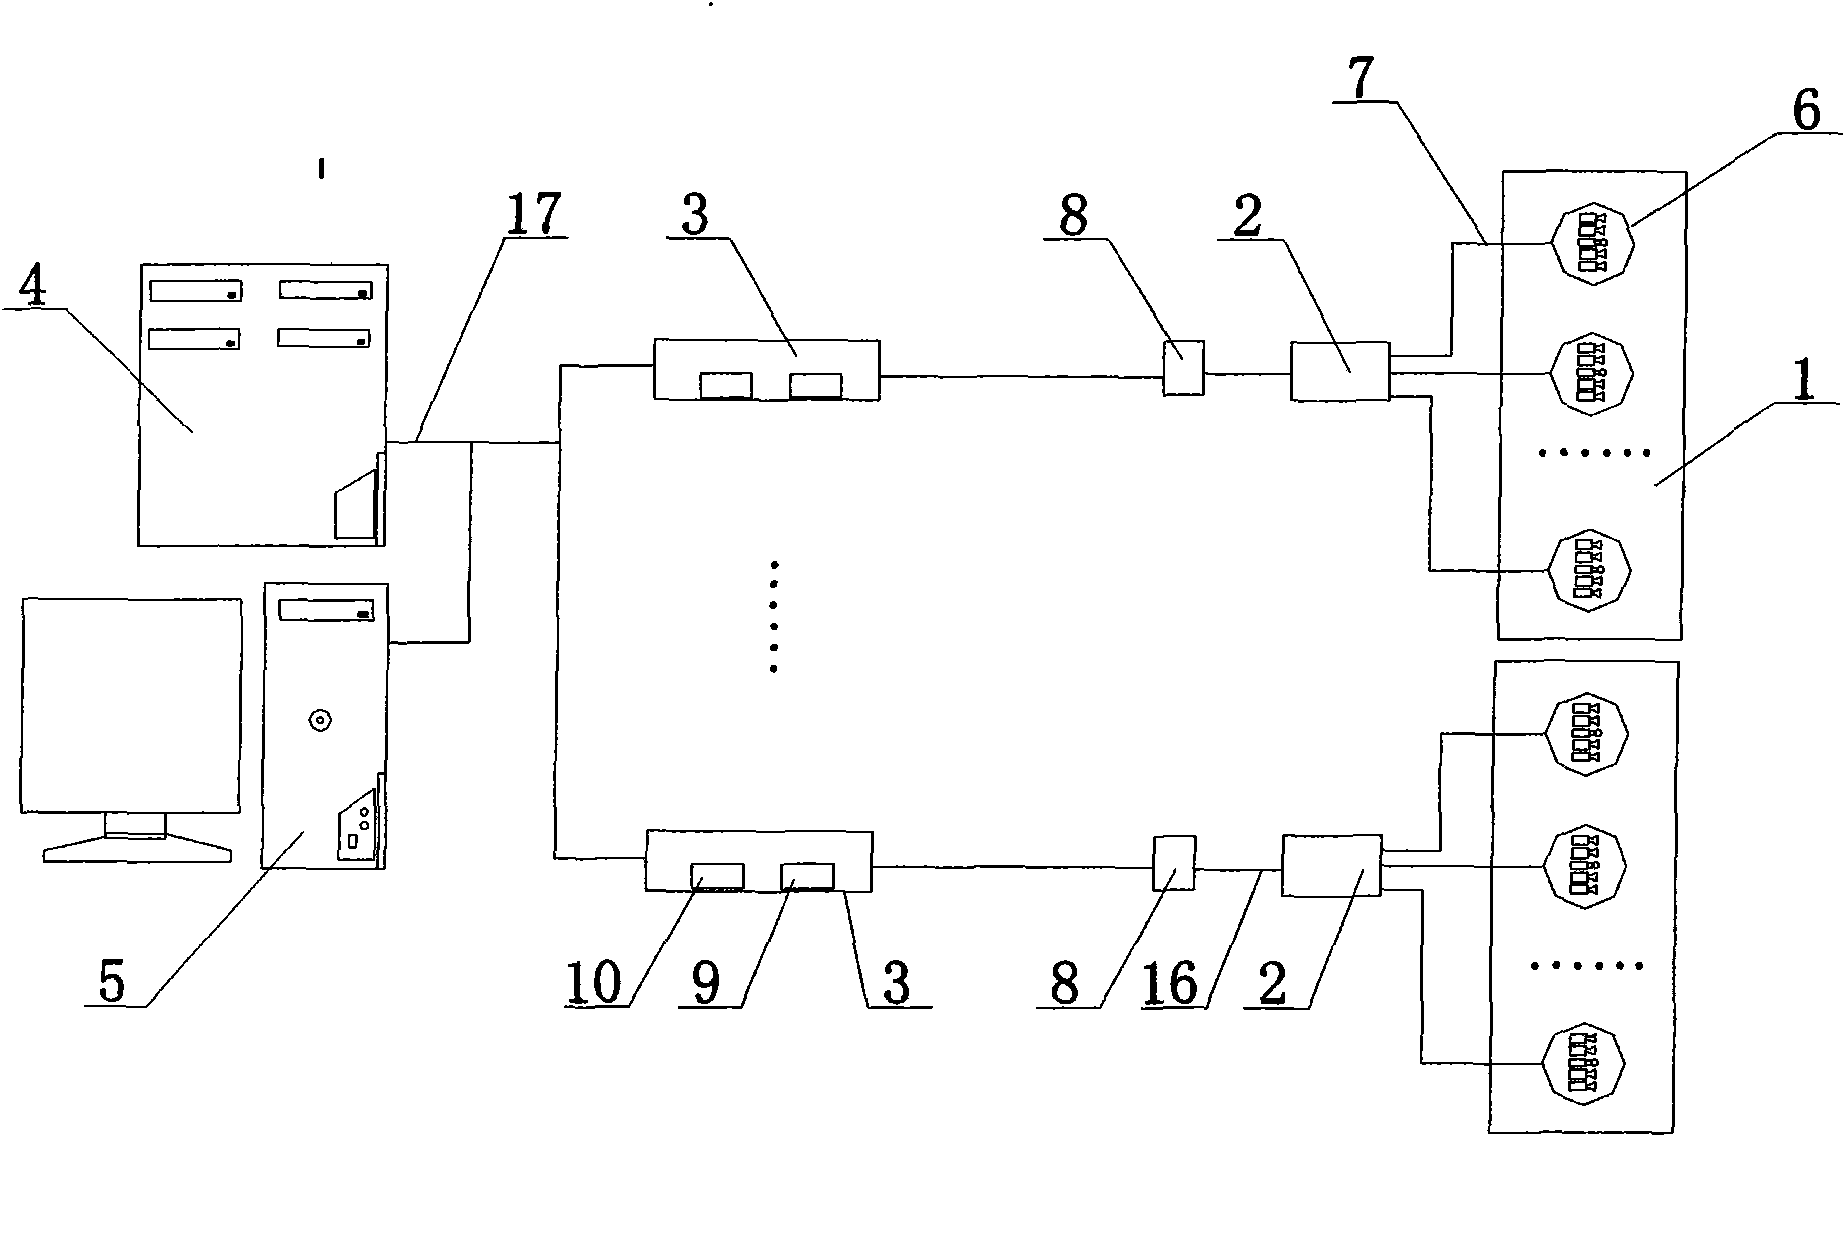 Internal operation image real-time monitoring system for high-voltage electric apparatus